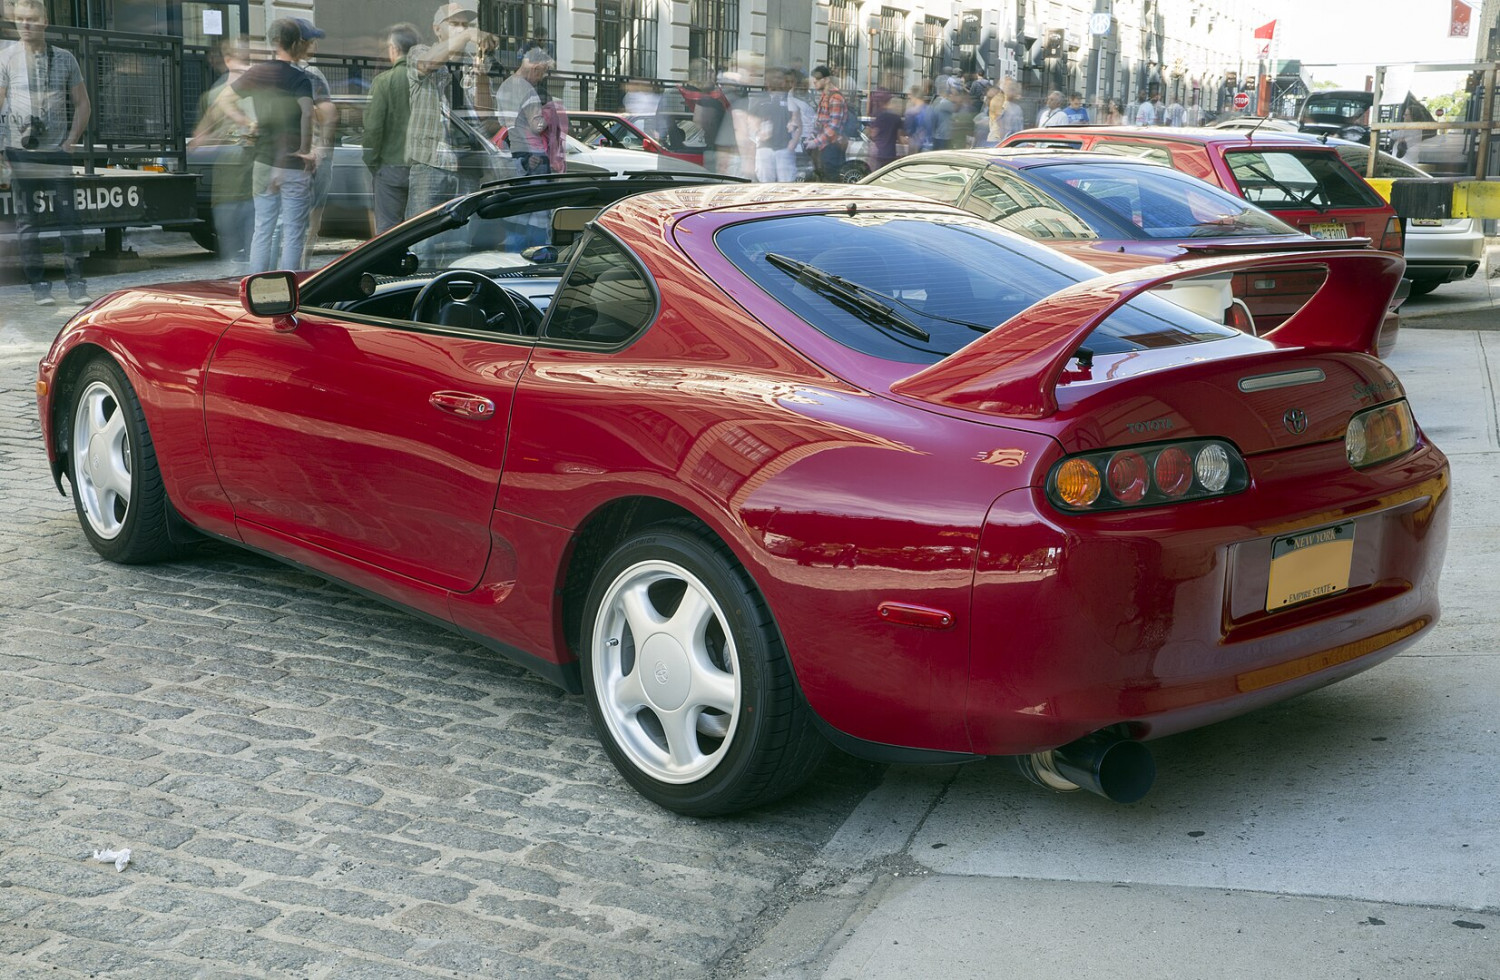 Example of a Supra 4